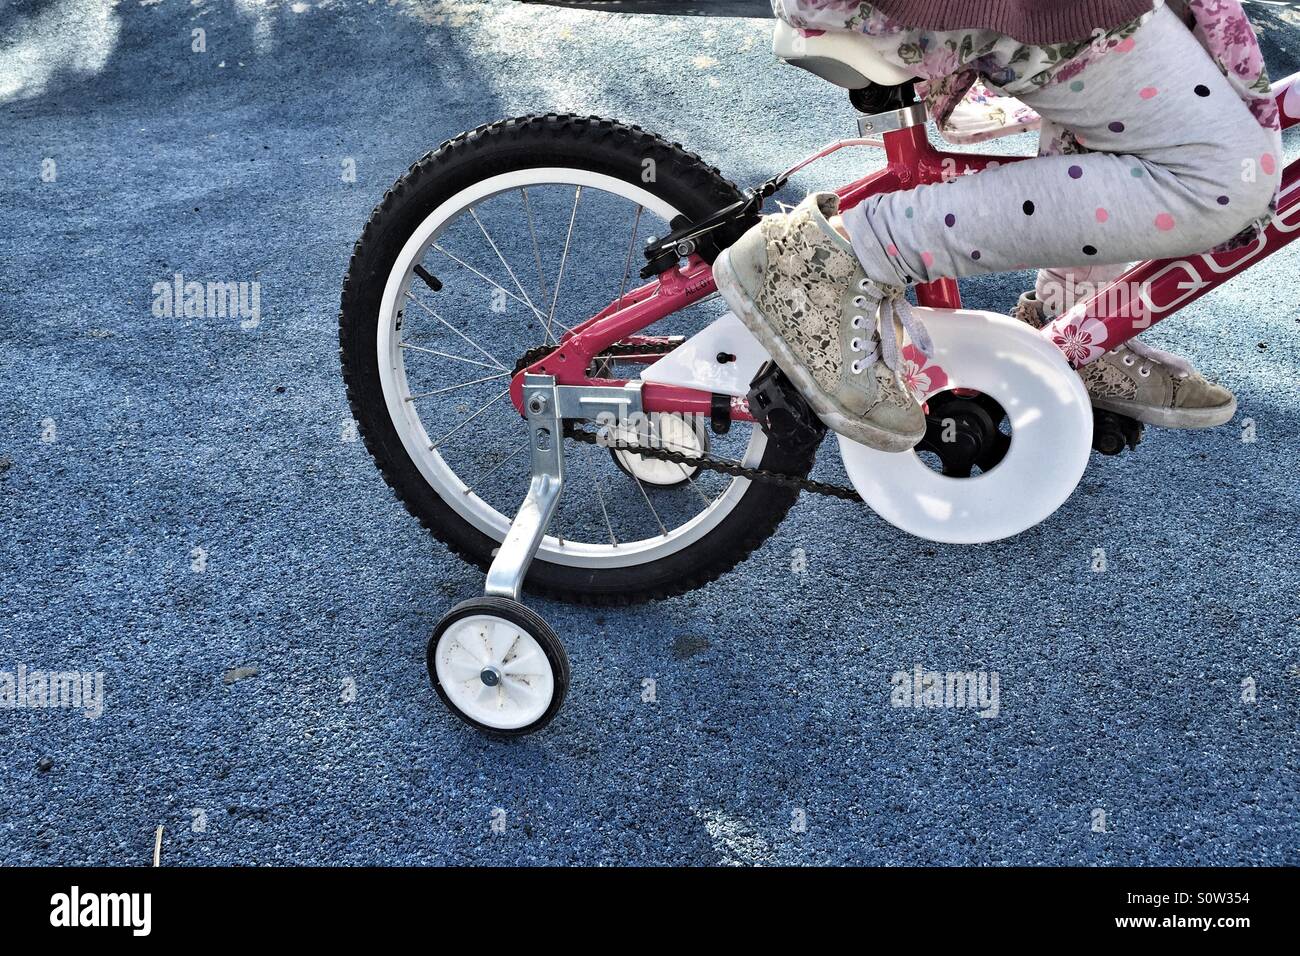 Girl learning to ride a bike Stock Photo